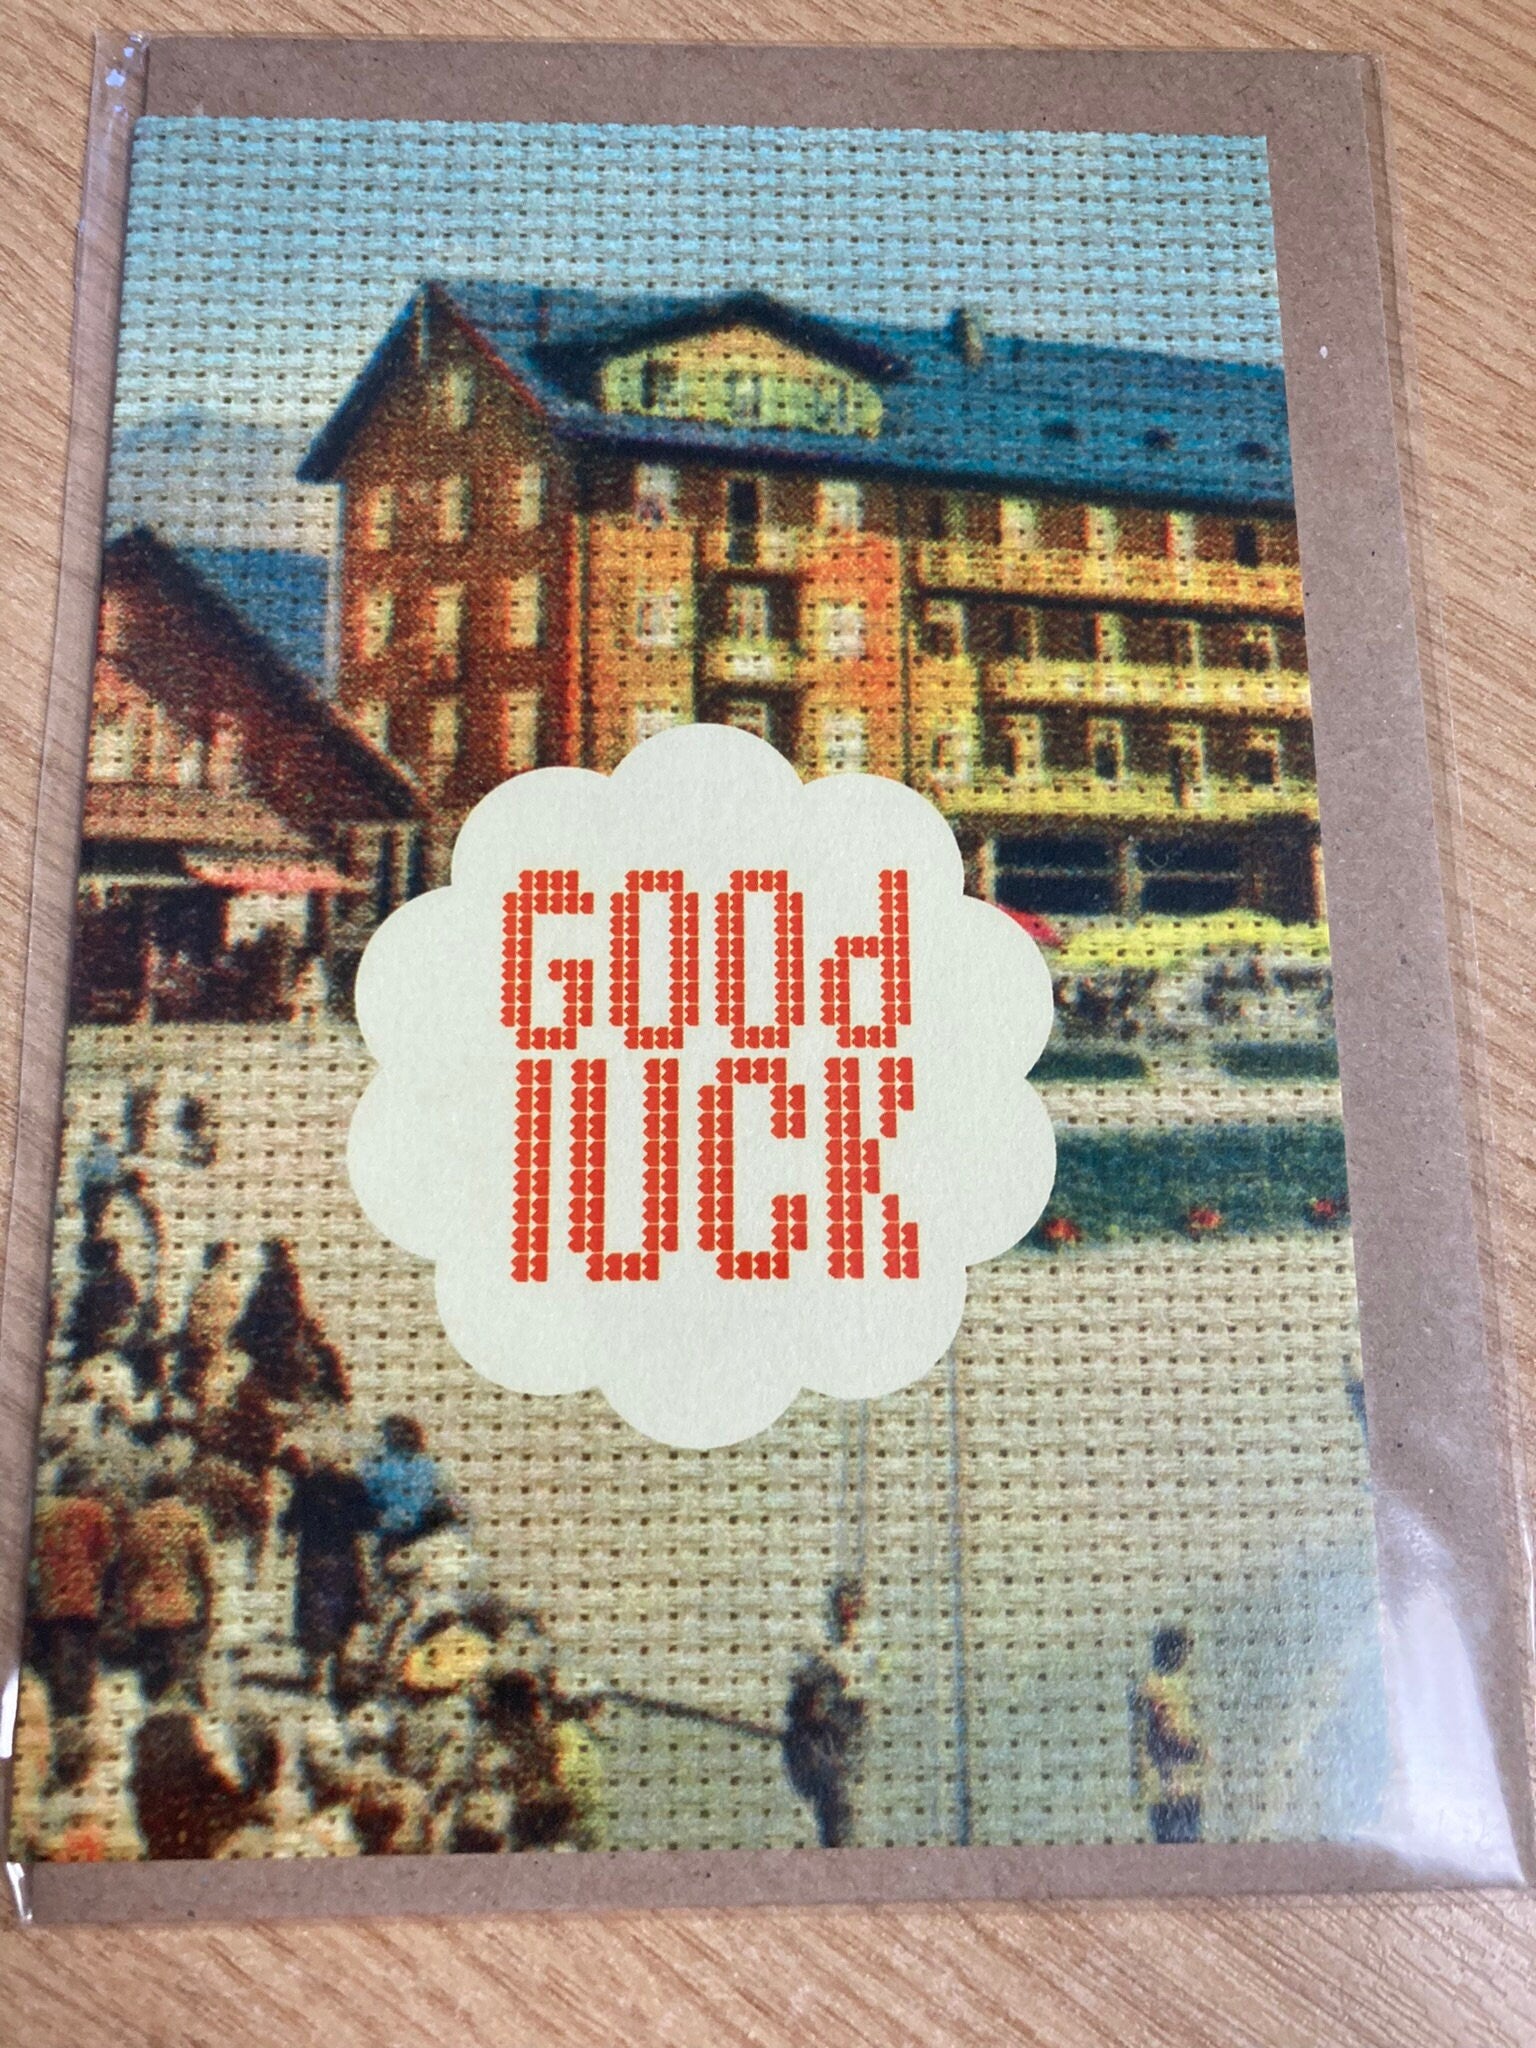 Swiss good luck in new job  card 1980s Vintage retro kitsch French